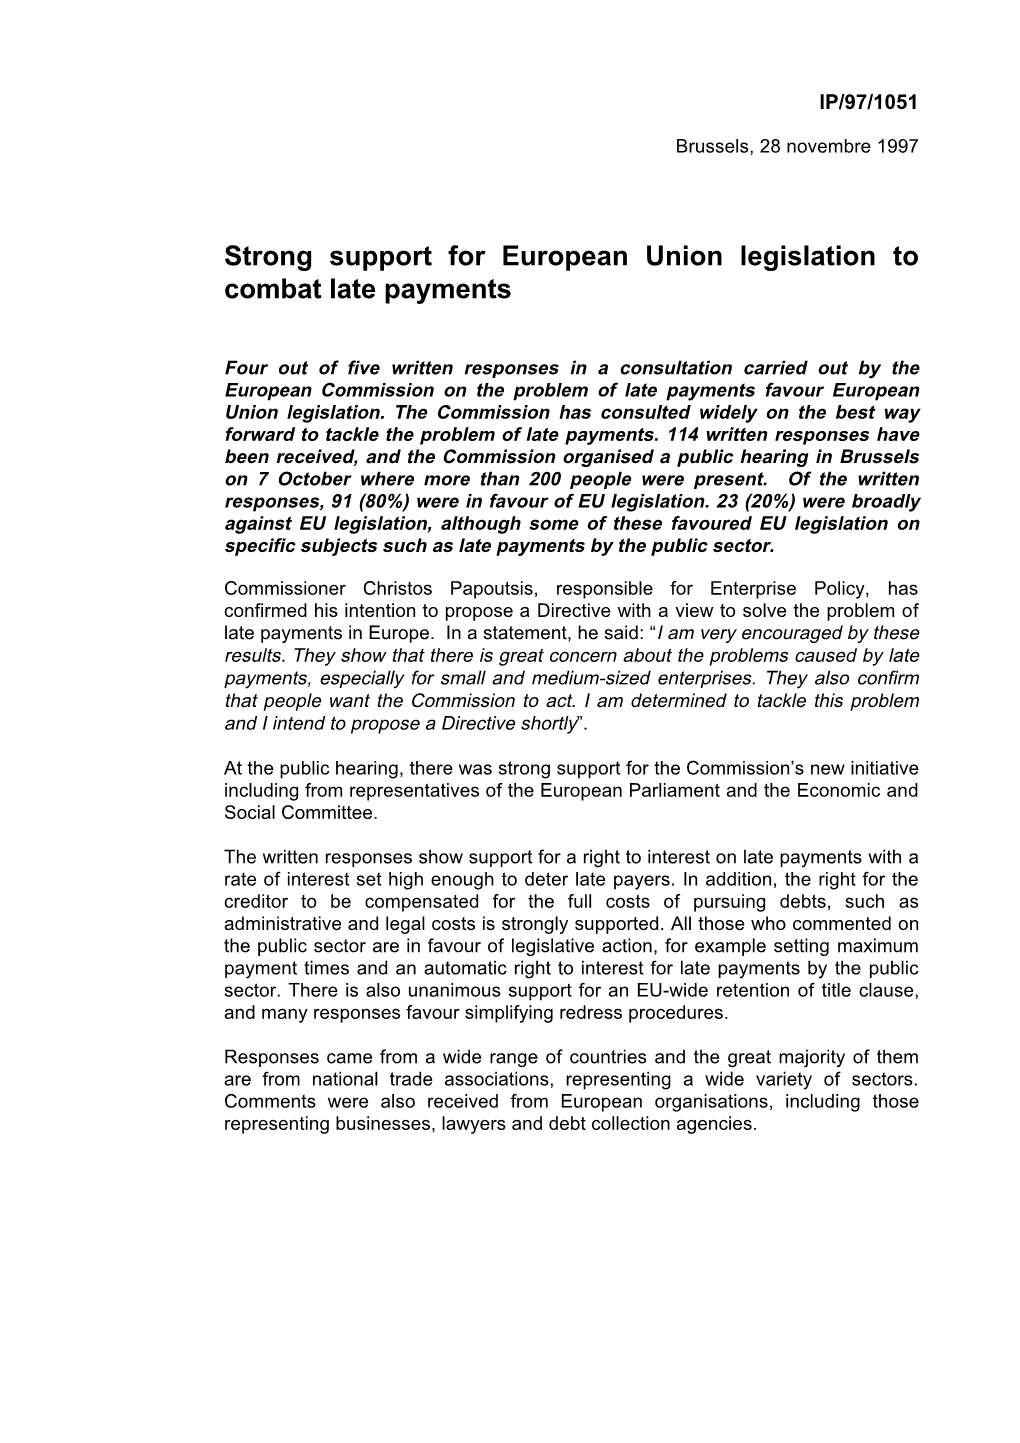 Strong Support for European Union Legislation to Combat Late Payments